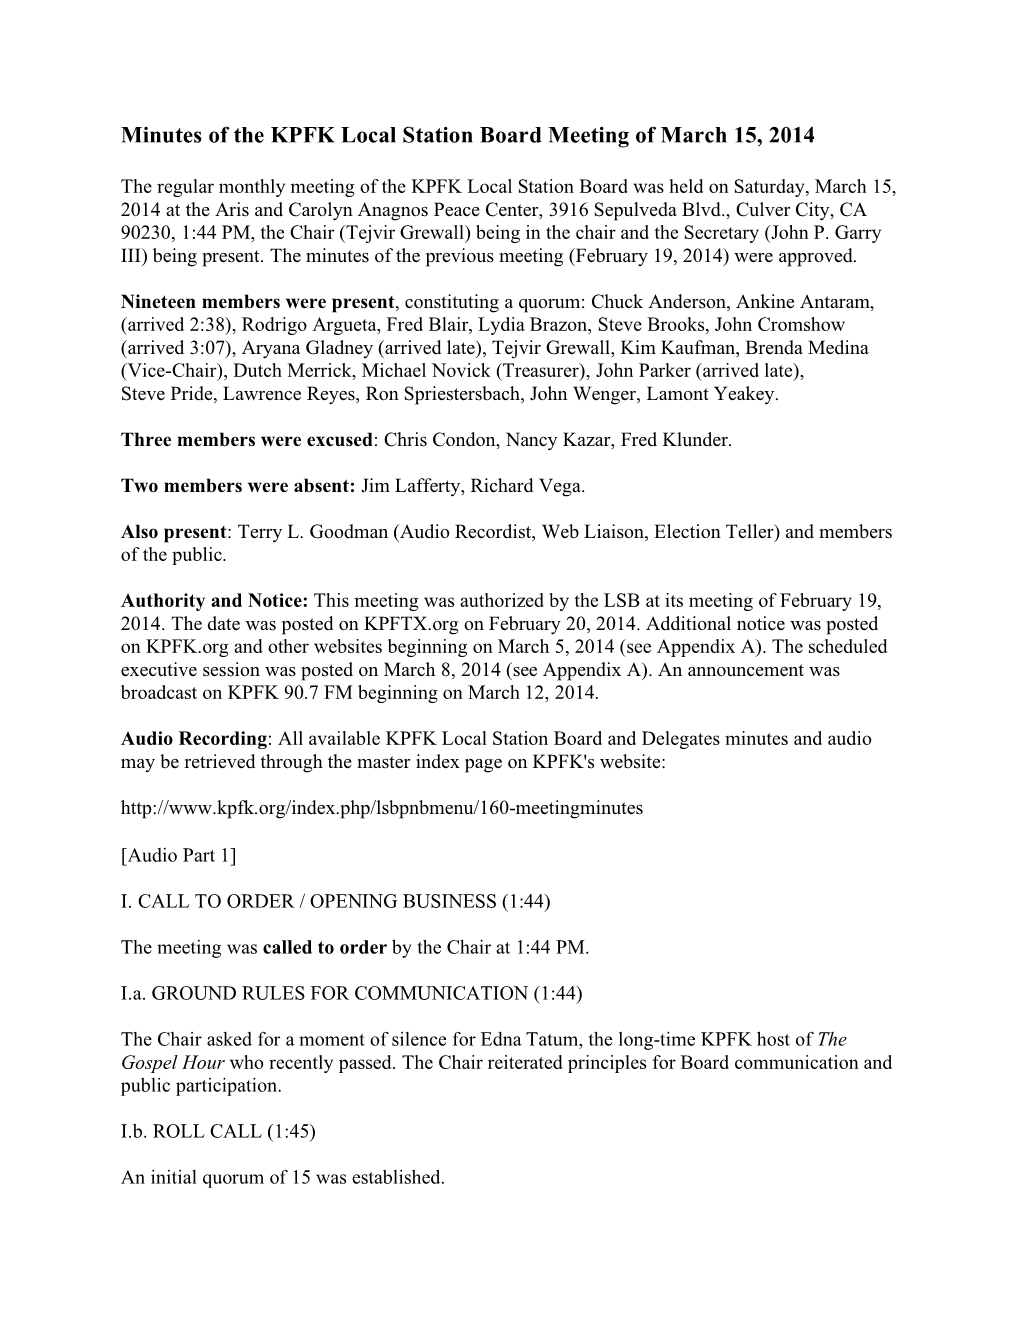 Minutes of the KPFK Local Station Board Meeting of March 15, 2014